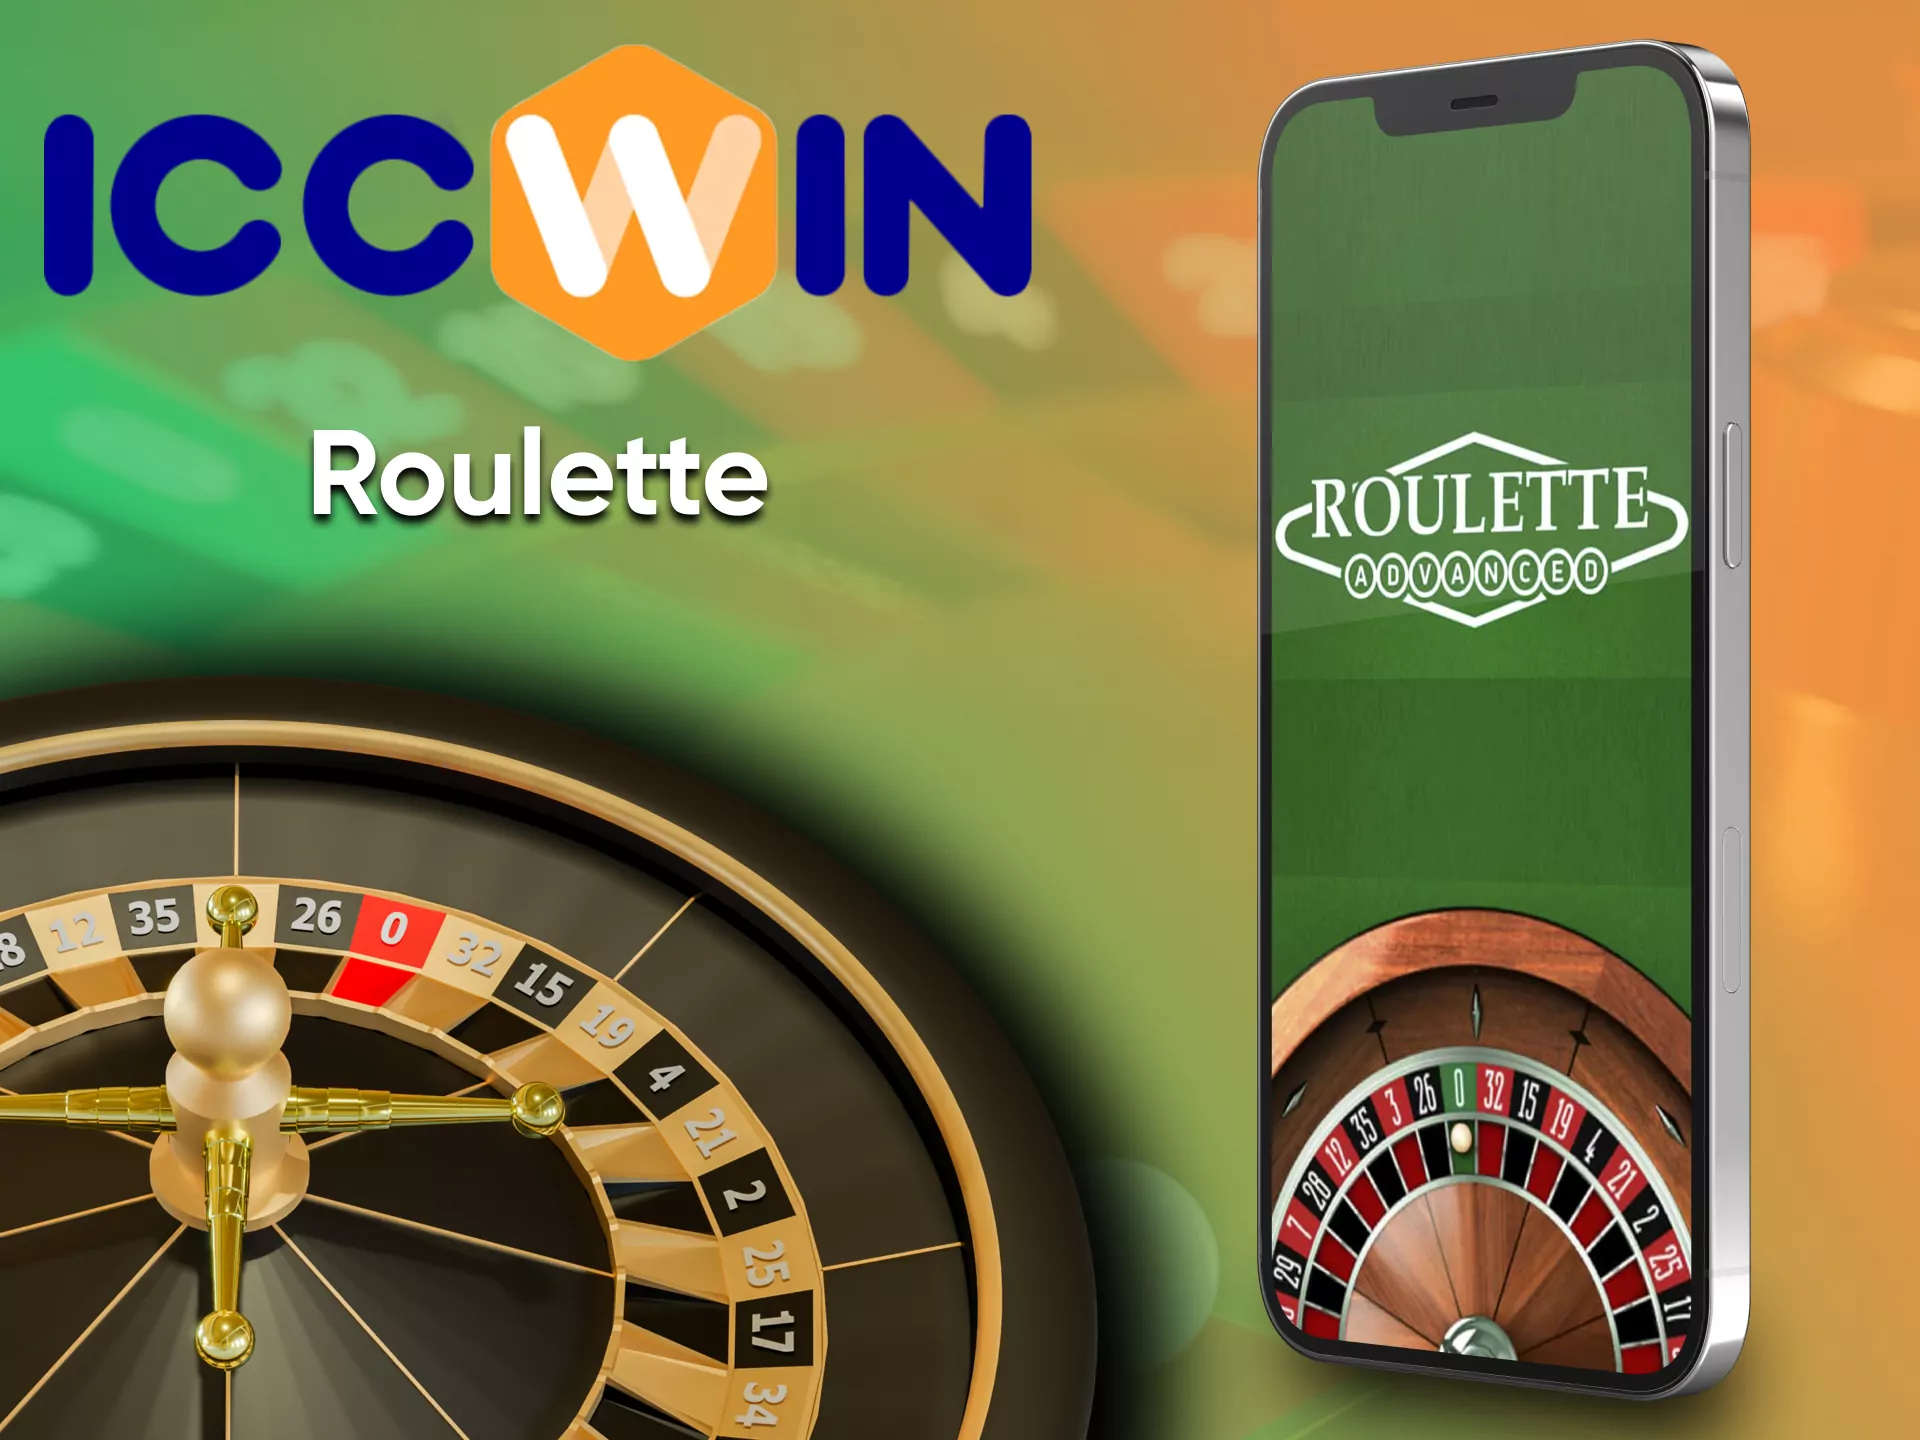 Choose a section with Roulette from ICCWin.